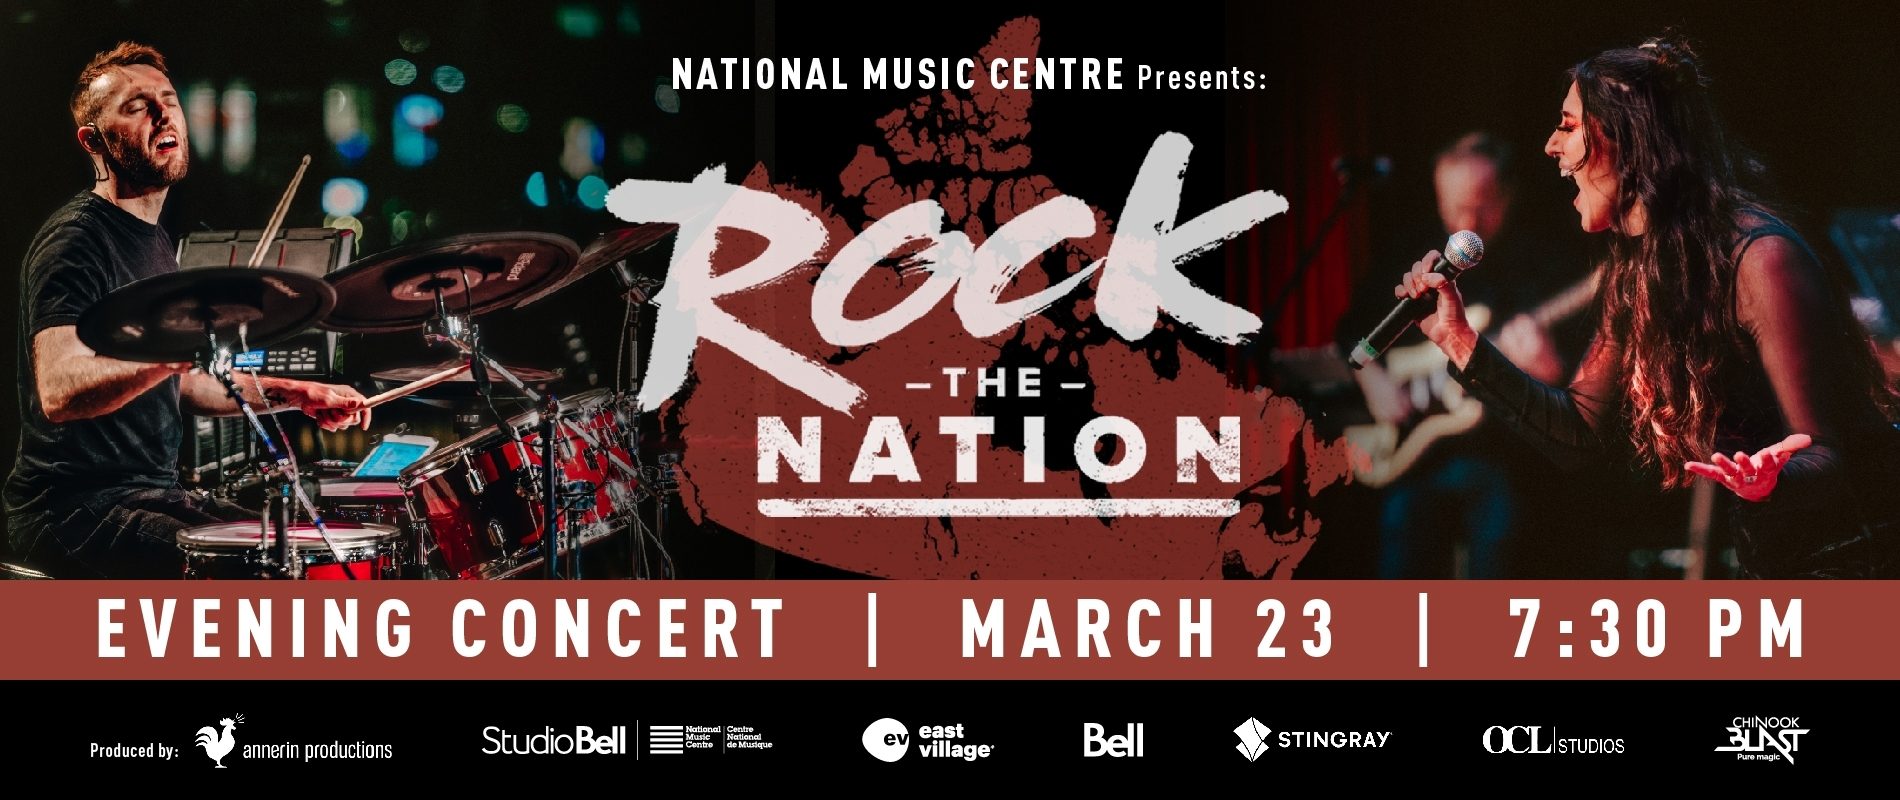 NMC Presents: Rock the Nation Evening Concert